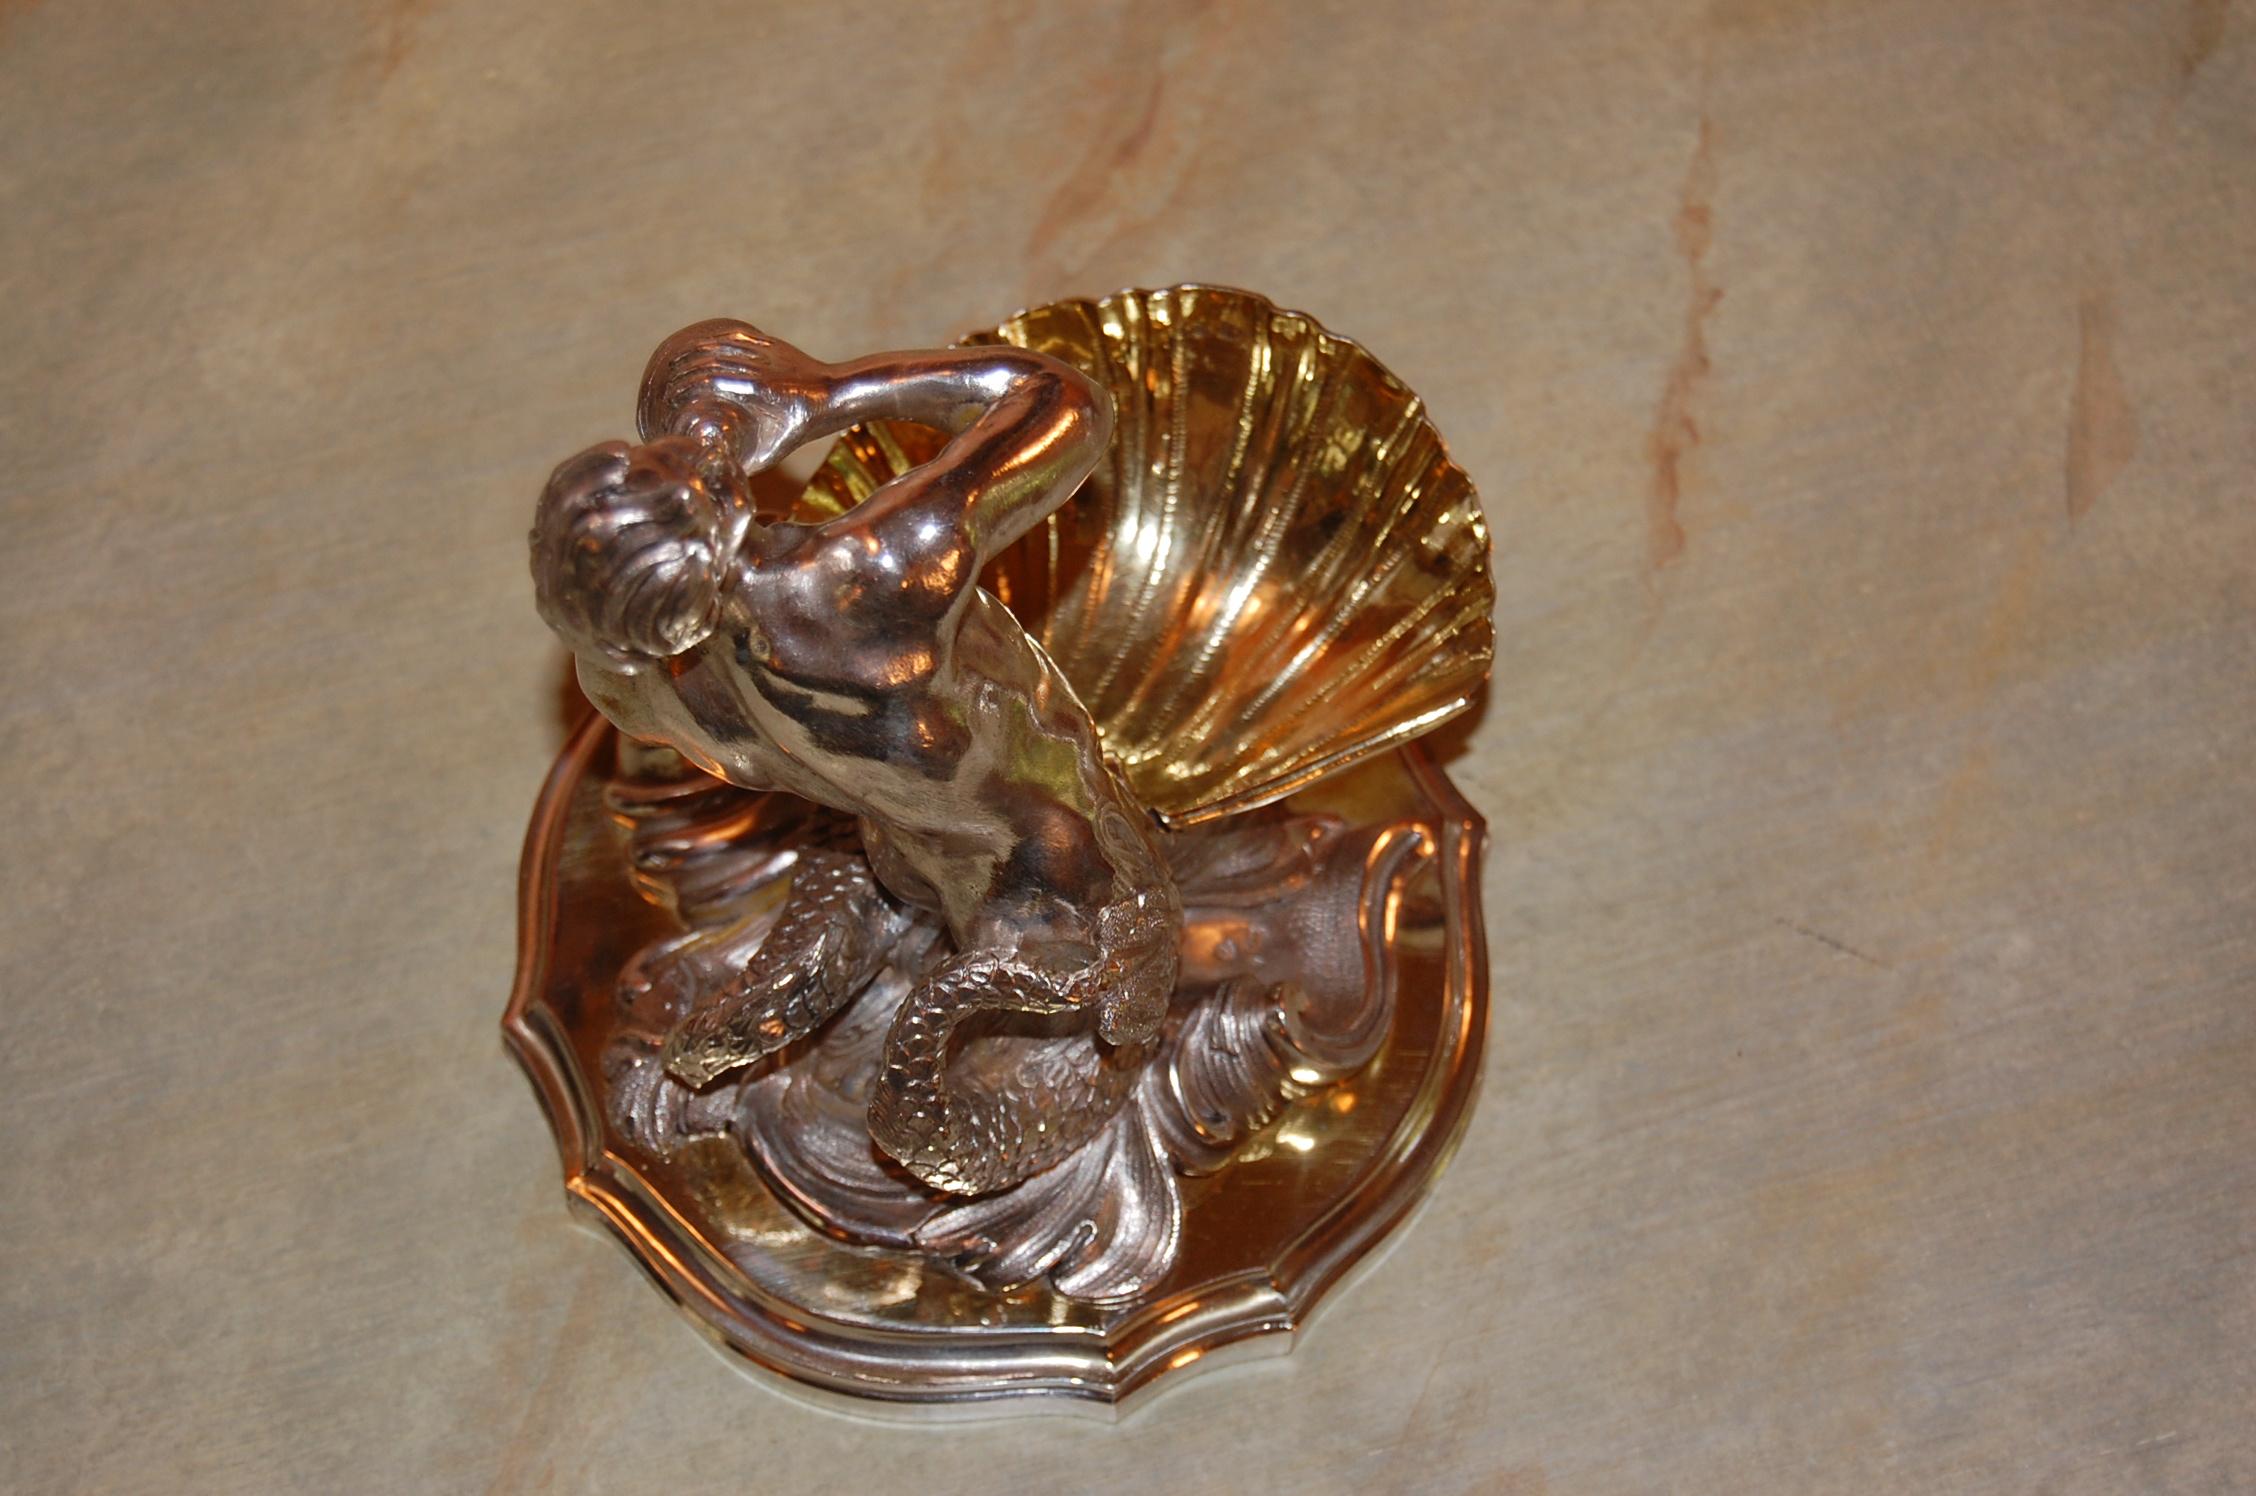 Silver Plated Candy/ Nut Bowls Depicting a Neptune God-Like Mermaid Figure, Pair For Sale 4